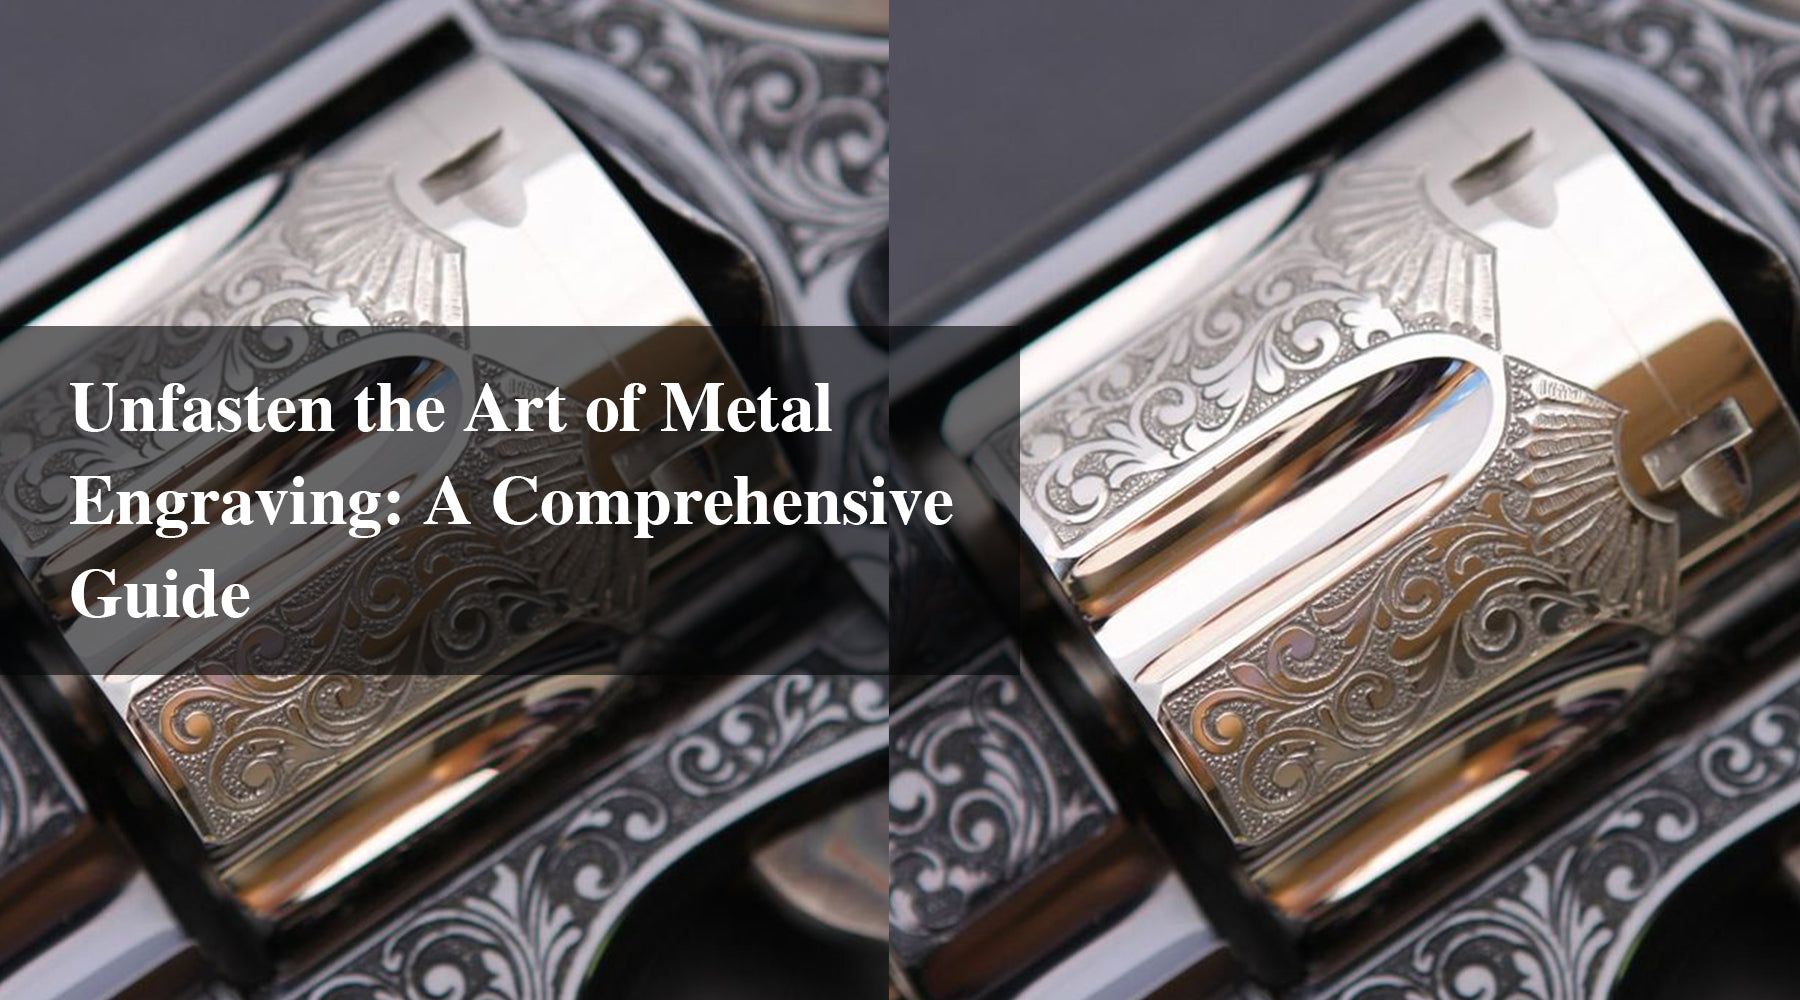 Unfasten the Art of Metal Engraving: A Comprehensive Guide